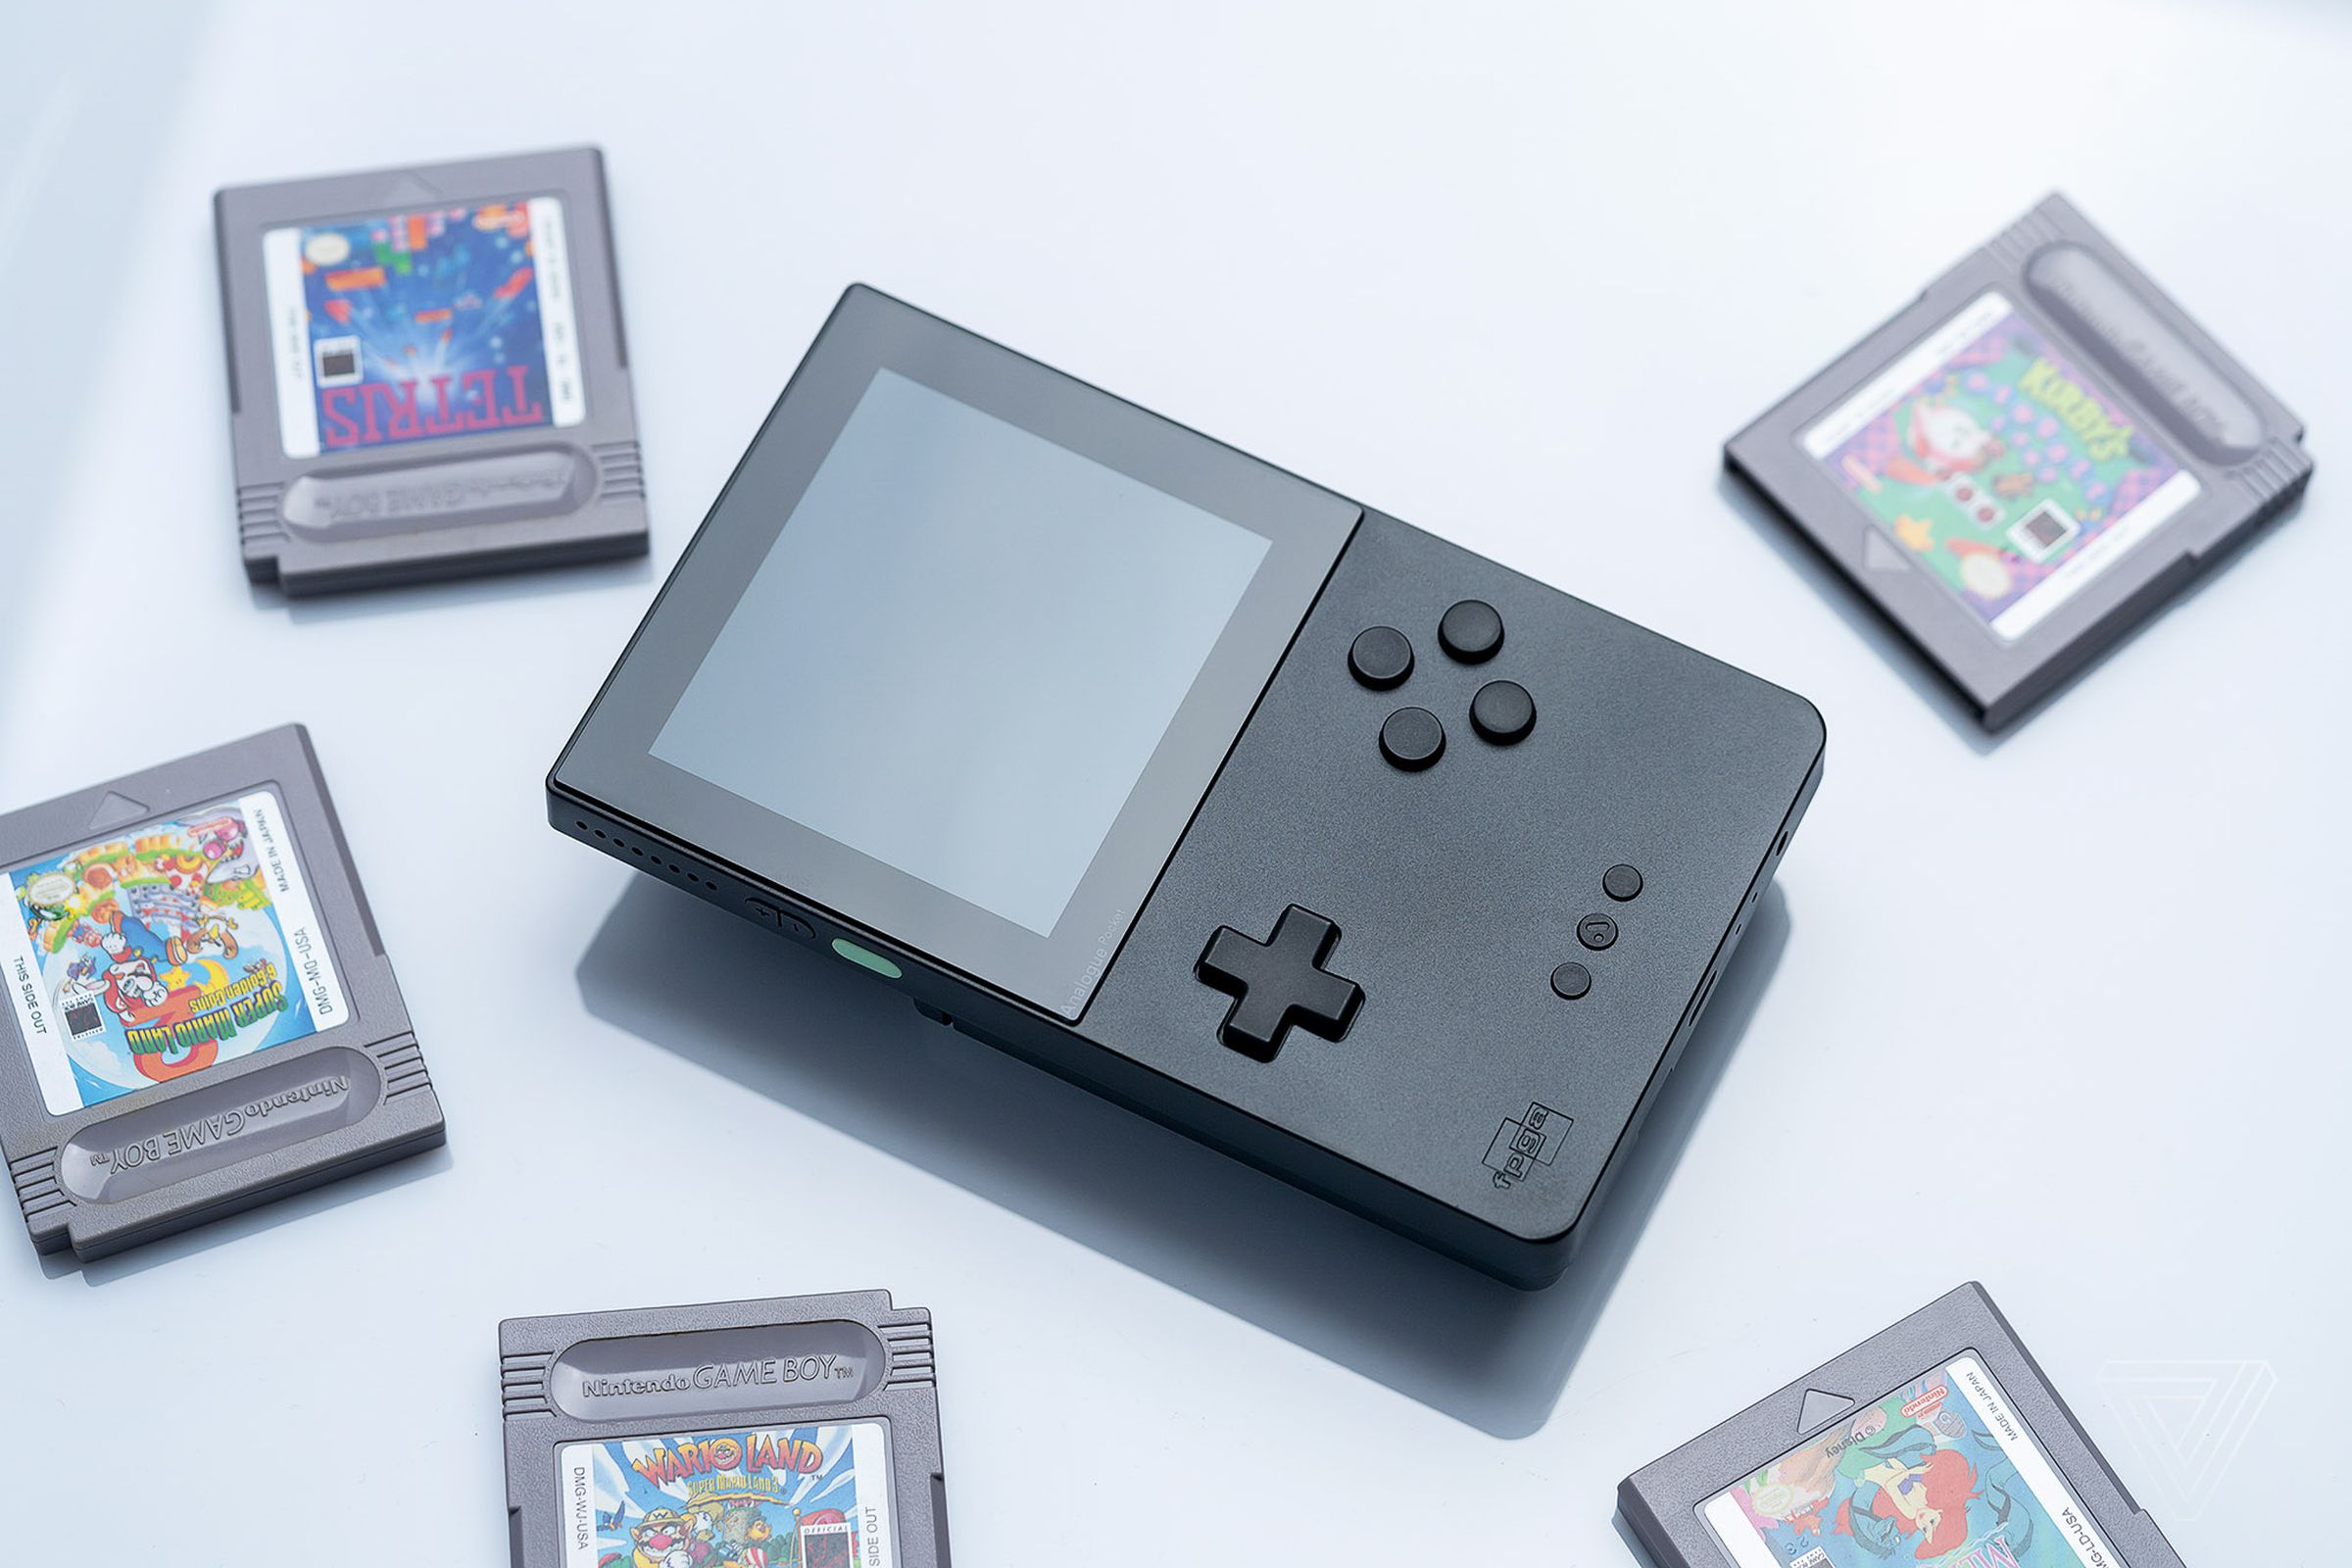 An Analogue Pocket surrounded by game cartridges